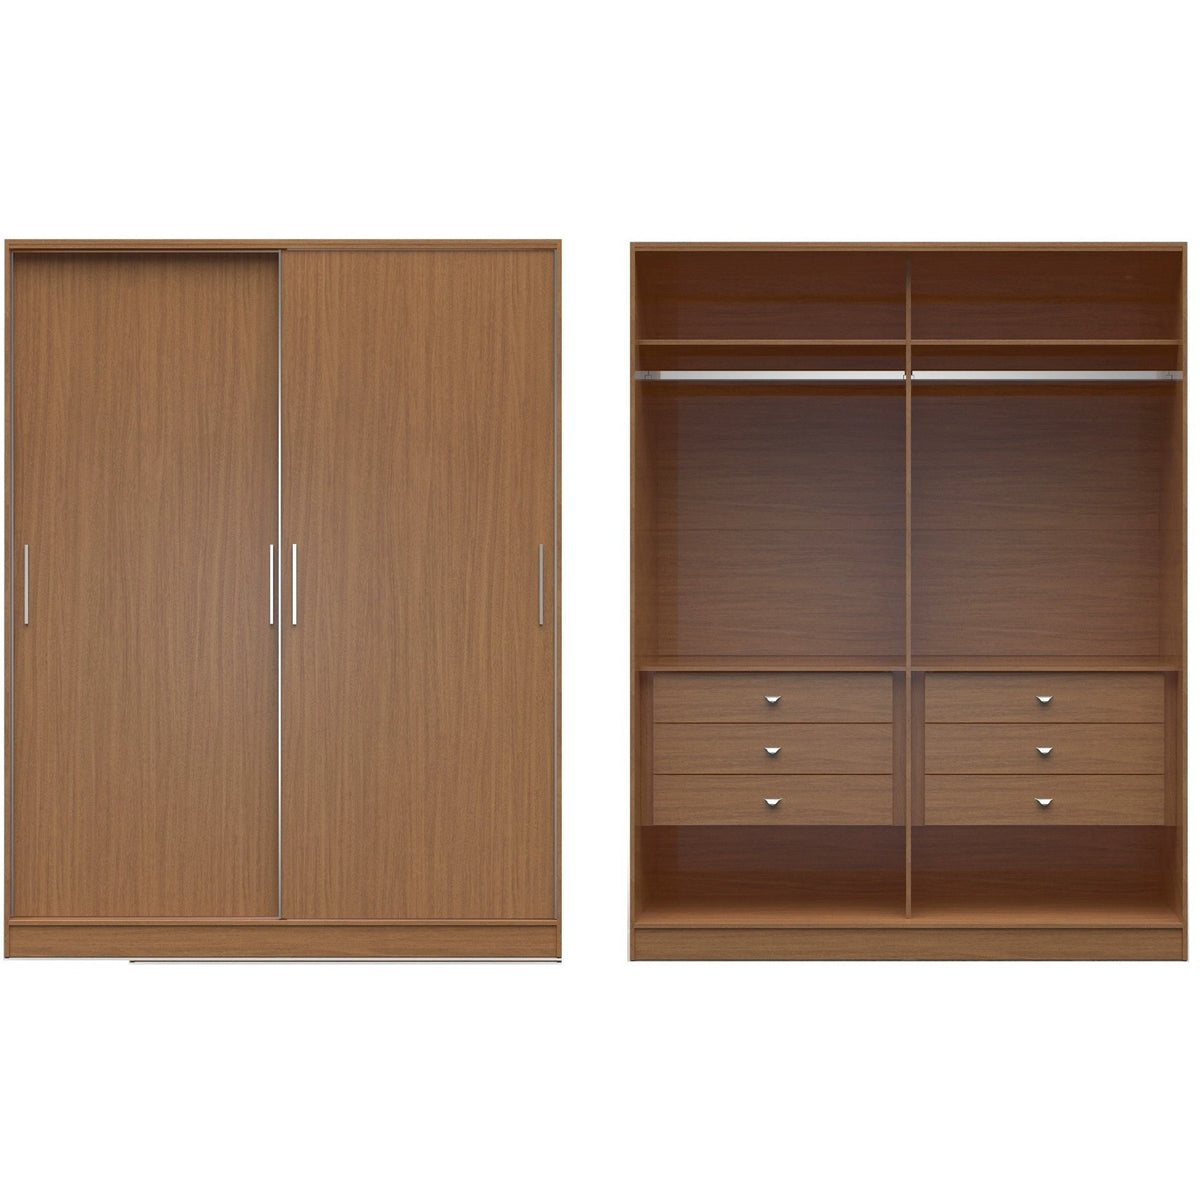 Manhattan Comfort Chelsea 2.0 - 70.07 inch Wide He/She Wardrobe with 6 Drawers and 2 Sliding Doors in Maple Cream-Minimal & Modern